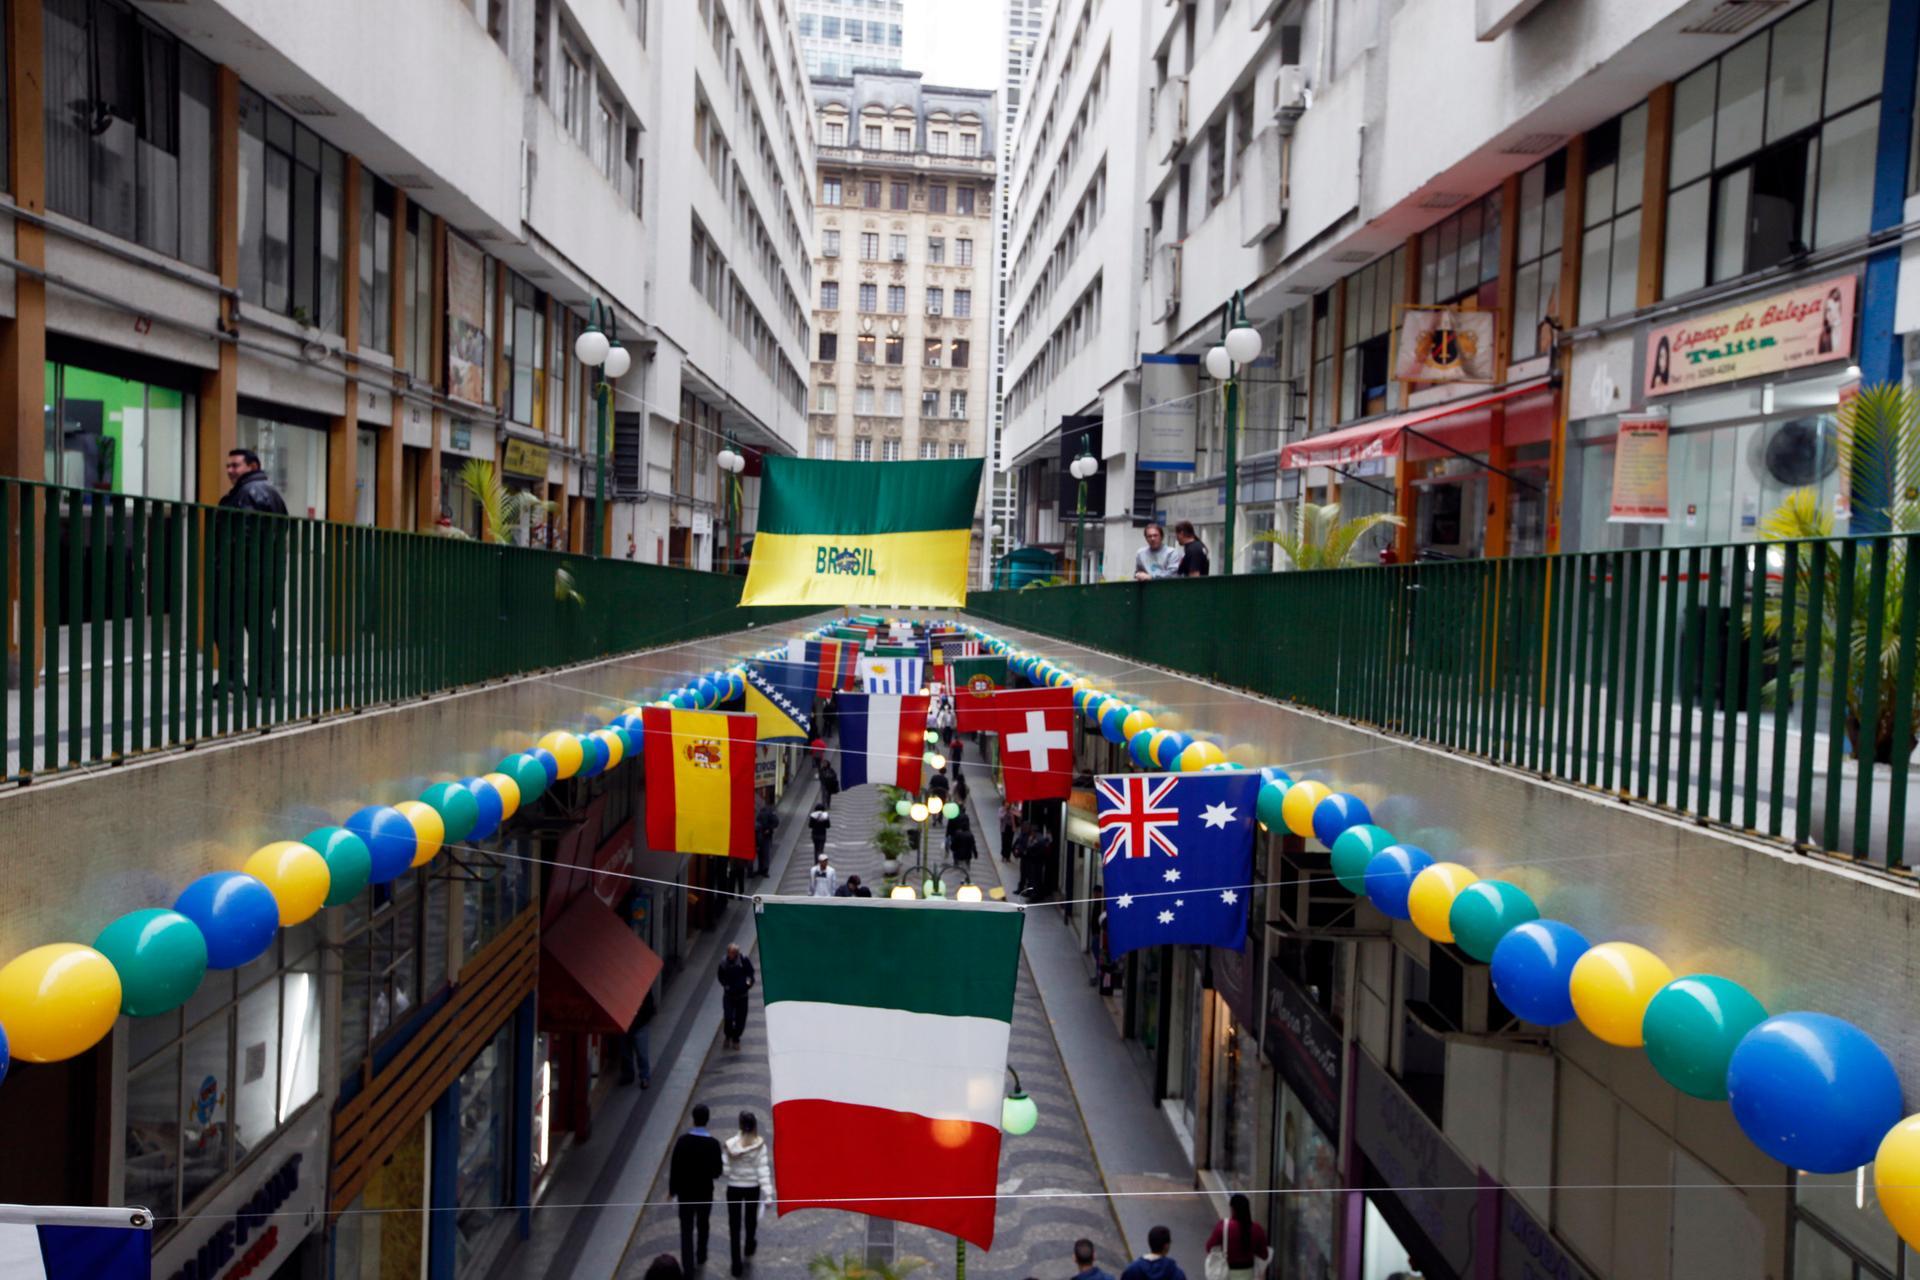 National flags of the countries that will participate in the 2014 World Cup decorate a commercial gallery in Sao Paulo. 